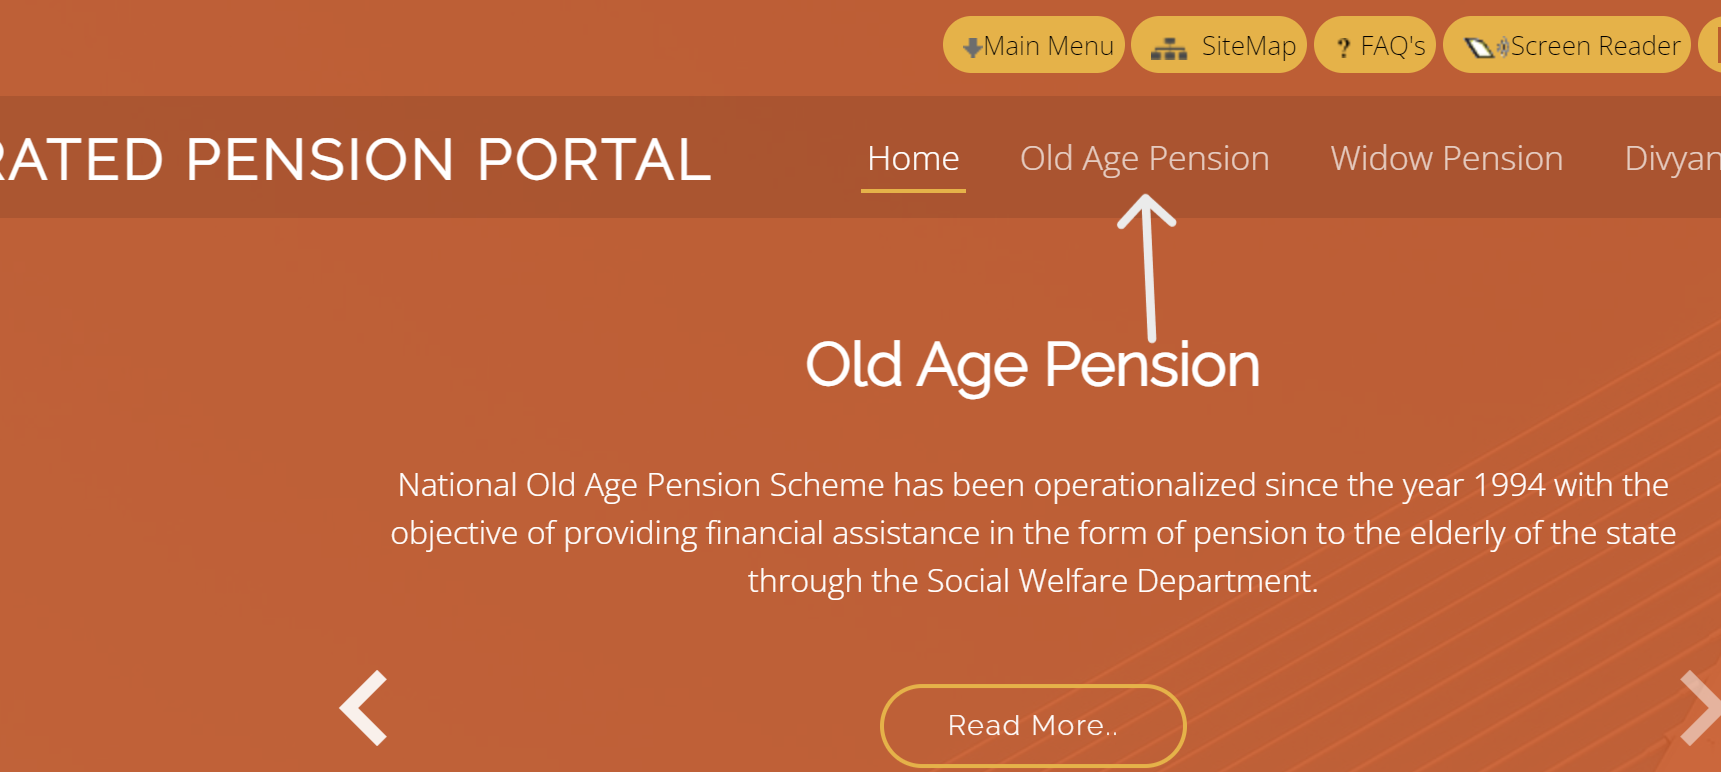 UP Old Age Pension